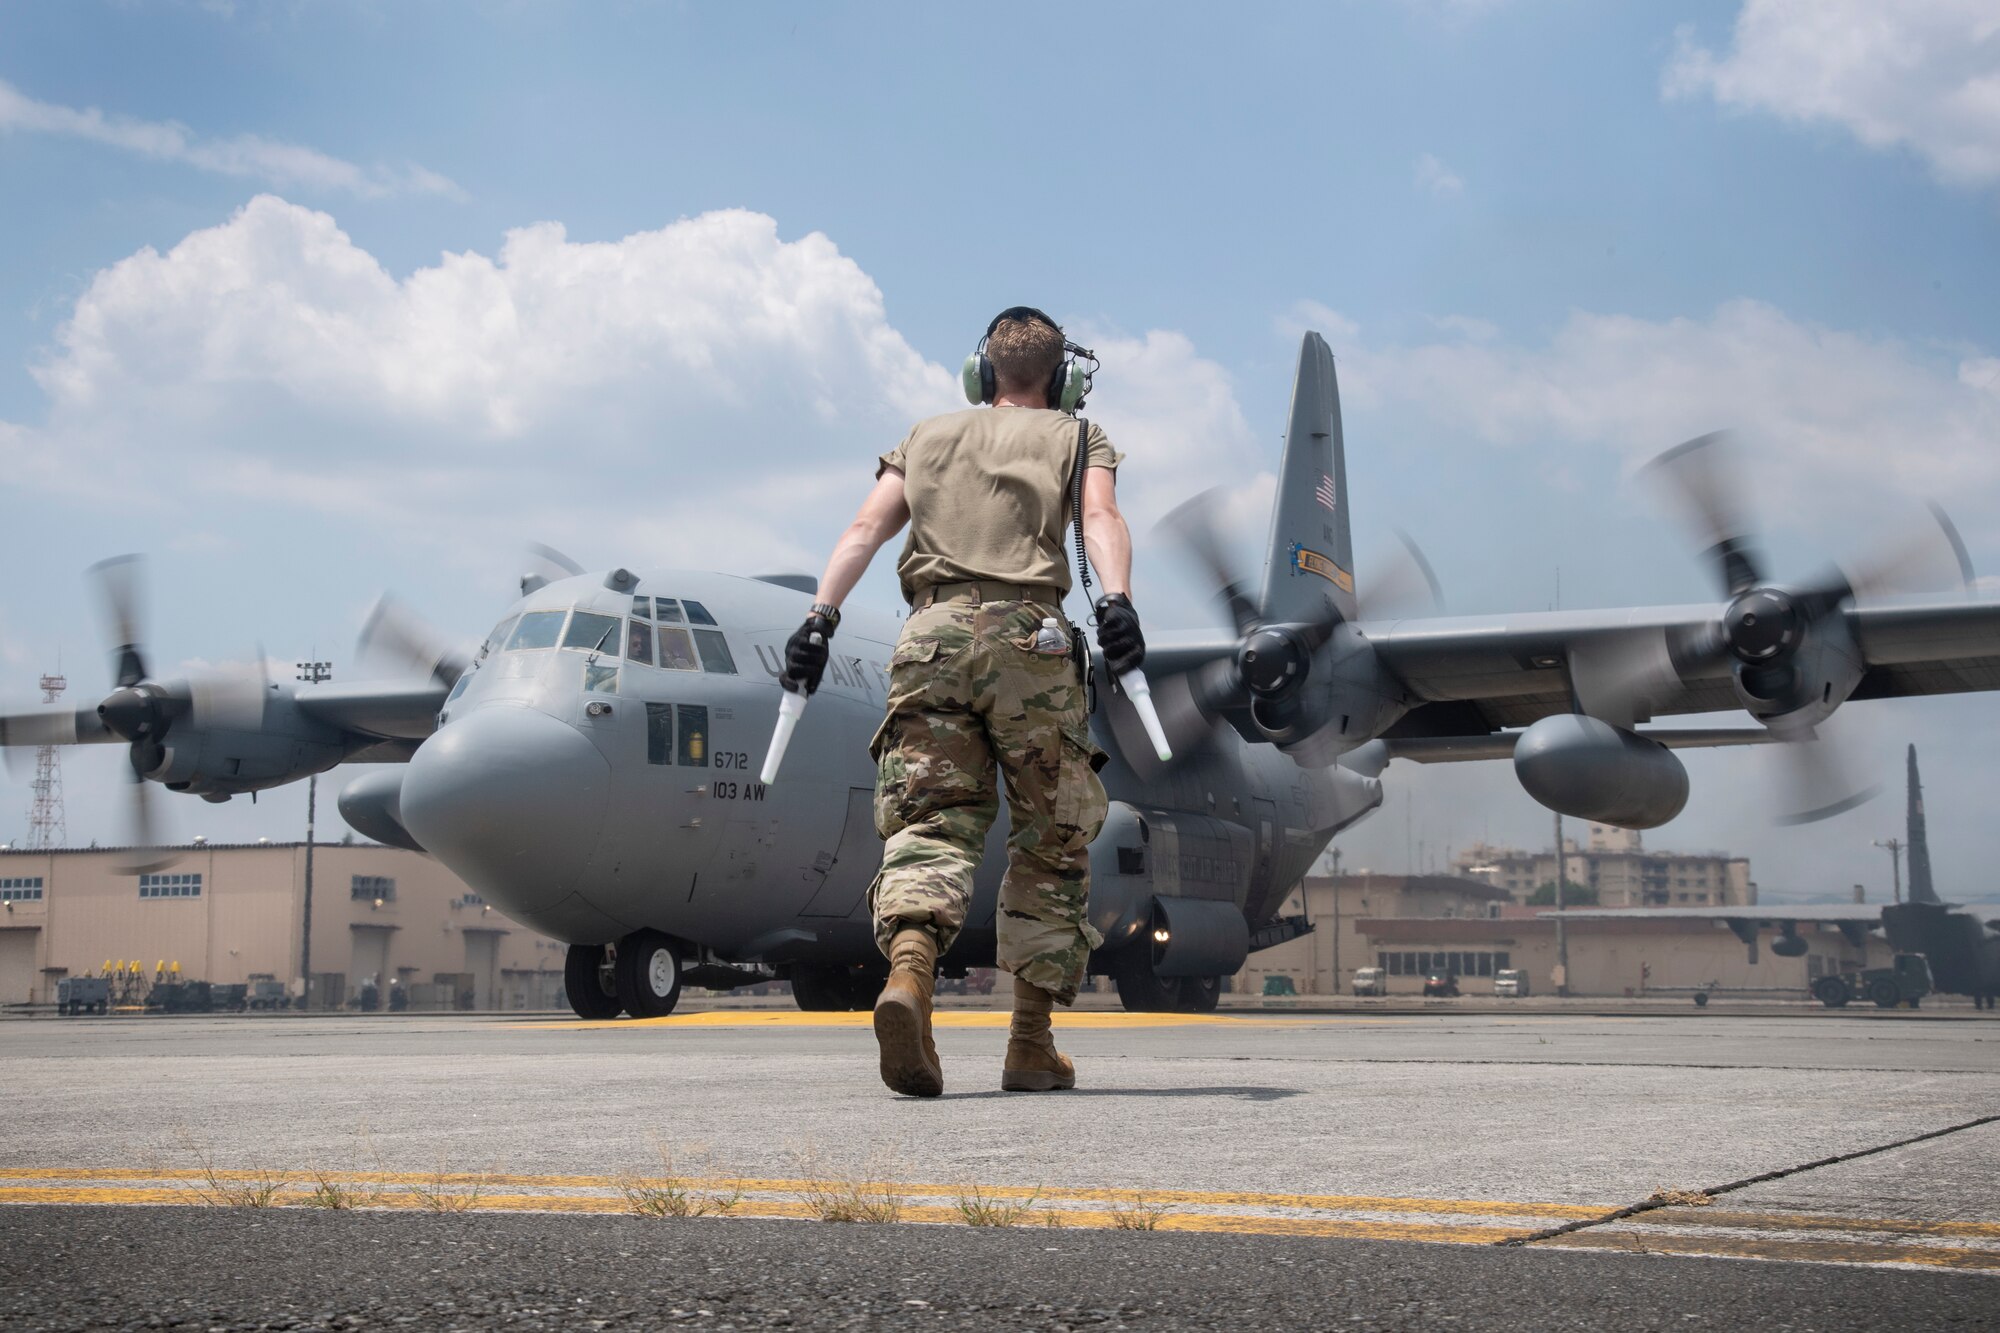 Staff Sgt. Jacob Roy, Air National Guard, marshals a C-130 Hercules at Yokota Air Base, Japan, July 17, 2023, in support of Mobility Guardian 2023. Air National Guardsmen from Missouri, Montana and Connecticut worked together as one unit to during to ensure C-130s could perform rapid global mobility in support of MG23. A multilateral endeavor, MG23 features seven participating countries – Australia, Canada, France, Japan, New Zealand, United Kingdom, and the United States – operating approximately 70 mobility aircraft across multiple locations spanning a 3,000-mile exercise area from July 5-21. Our Allies and partners are one of our greatest strengths and a key strategic advantage. MG23 is an opportunity to deepen our connections with regional Allies and partners using bold initiatives. (U.S. Air Force photo by Tech. Sgt. Christopher Hubenthal)